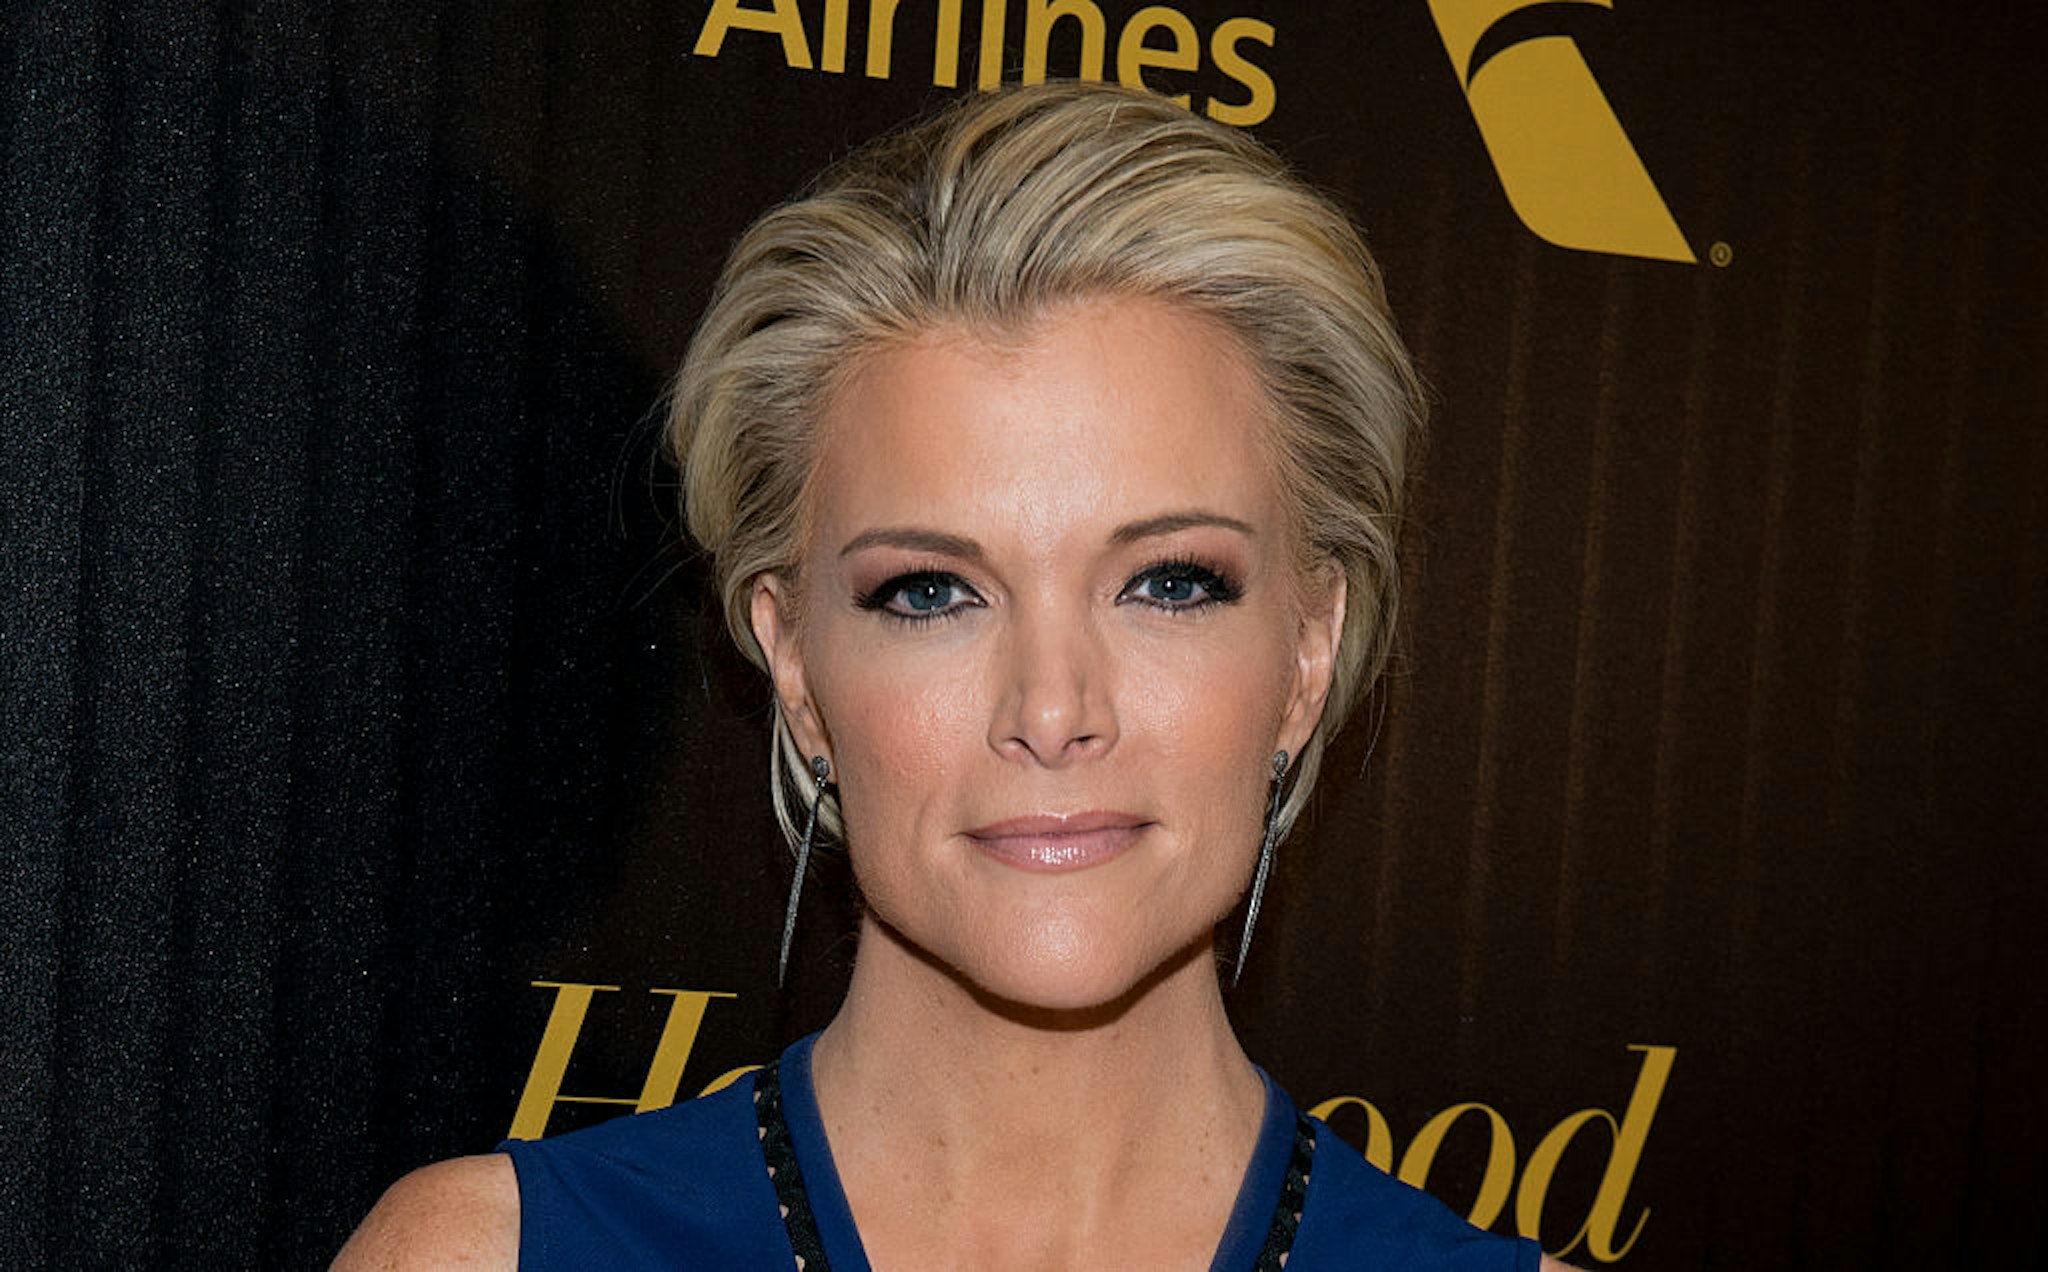 Journalist Megyn Kelly attends The Hollywood Reporter's 2016 35 Most Powerful People in Media at Four Seasons Restaurant on April 6, 2016 in New York City.